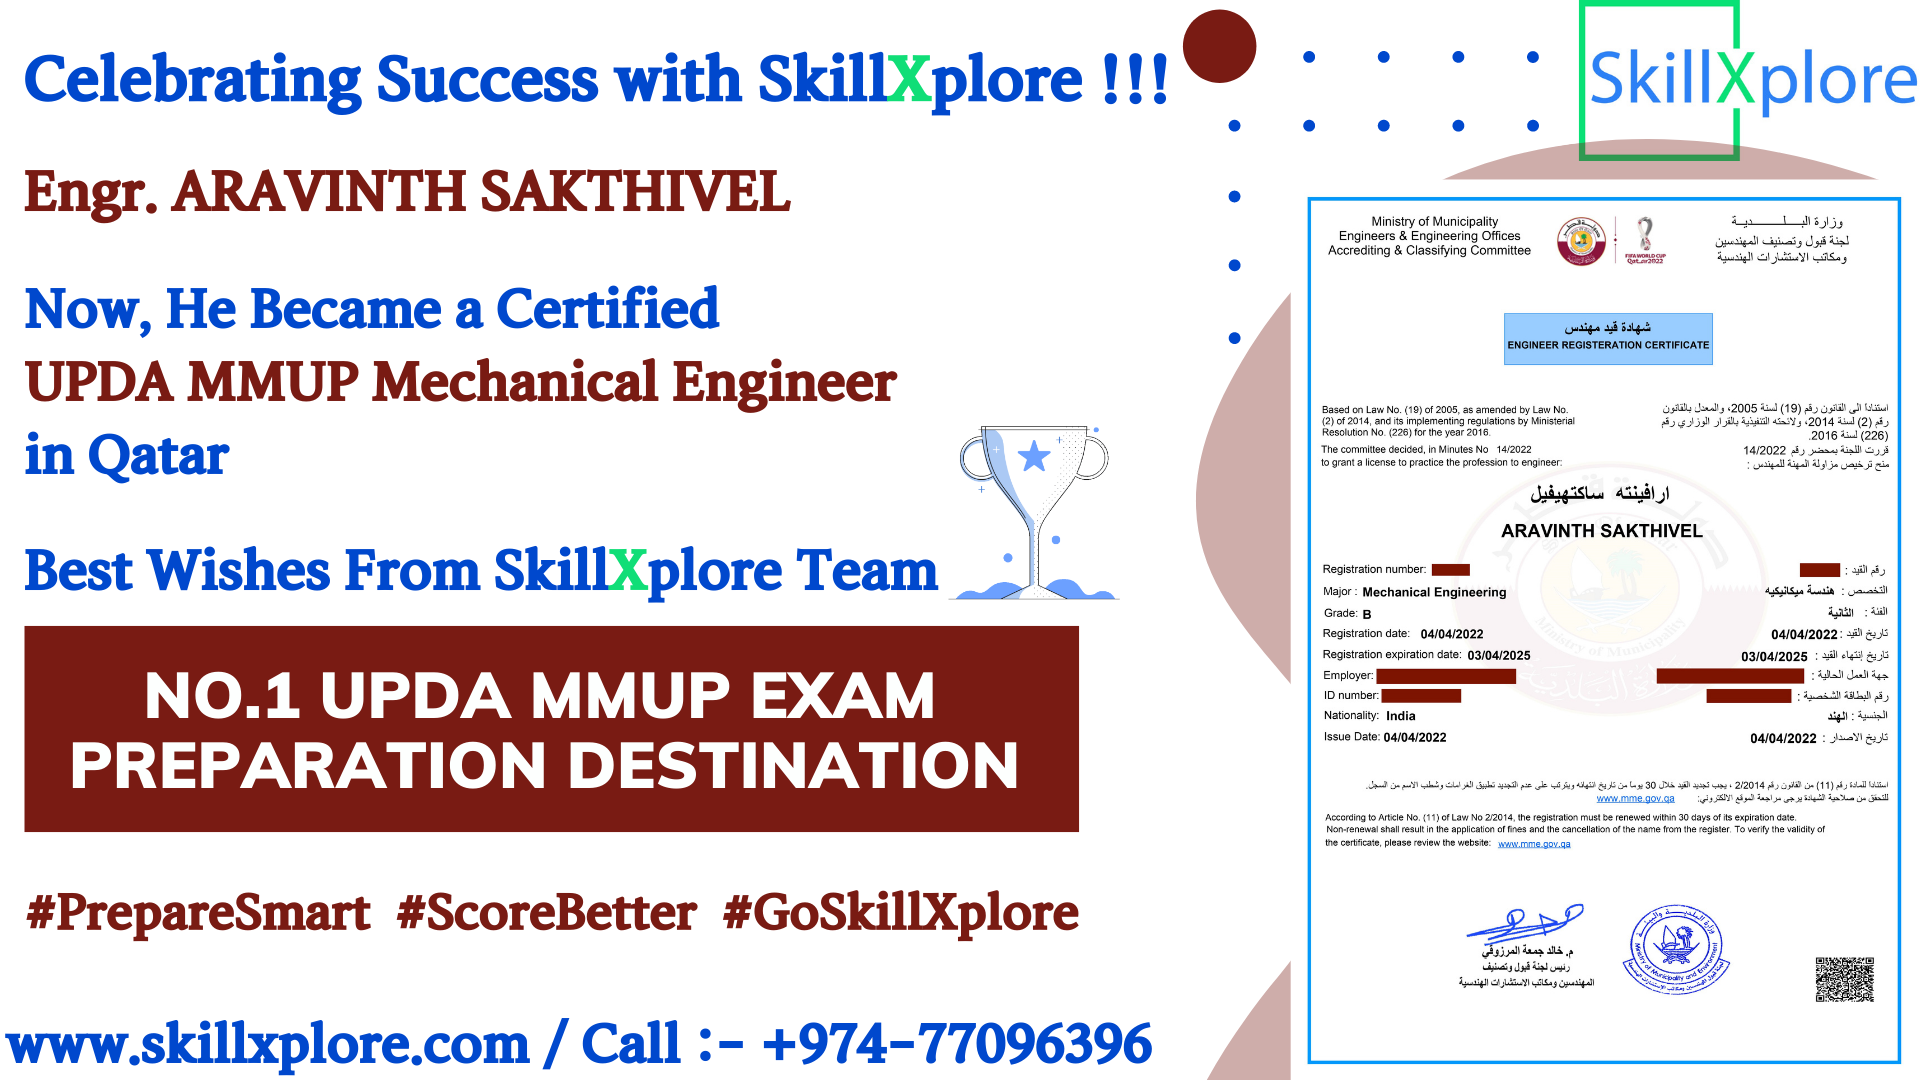 How to Apply For UPDA Exam in Qatar SkillXplore